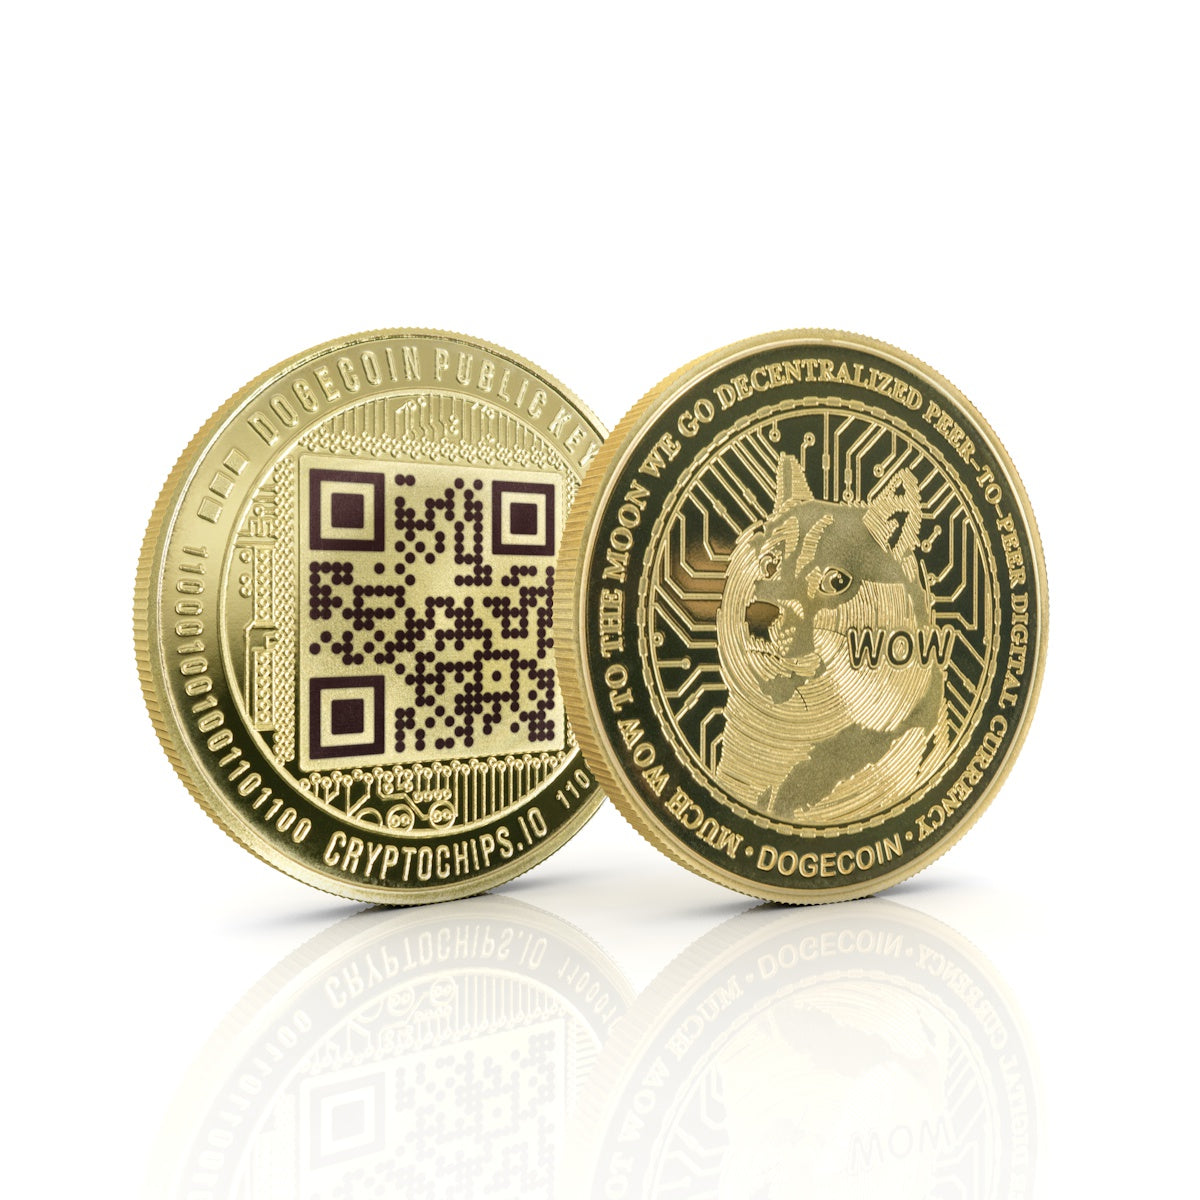 Cryptochips | Cryptochips | Dogecoin (DOGE) QR Coin | Laser Engraved Public Key Physical Crypto Coin. Collectable cryptocurrency merch you can hodl